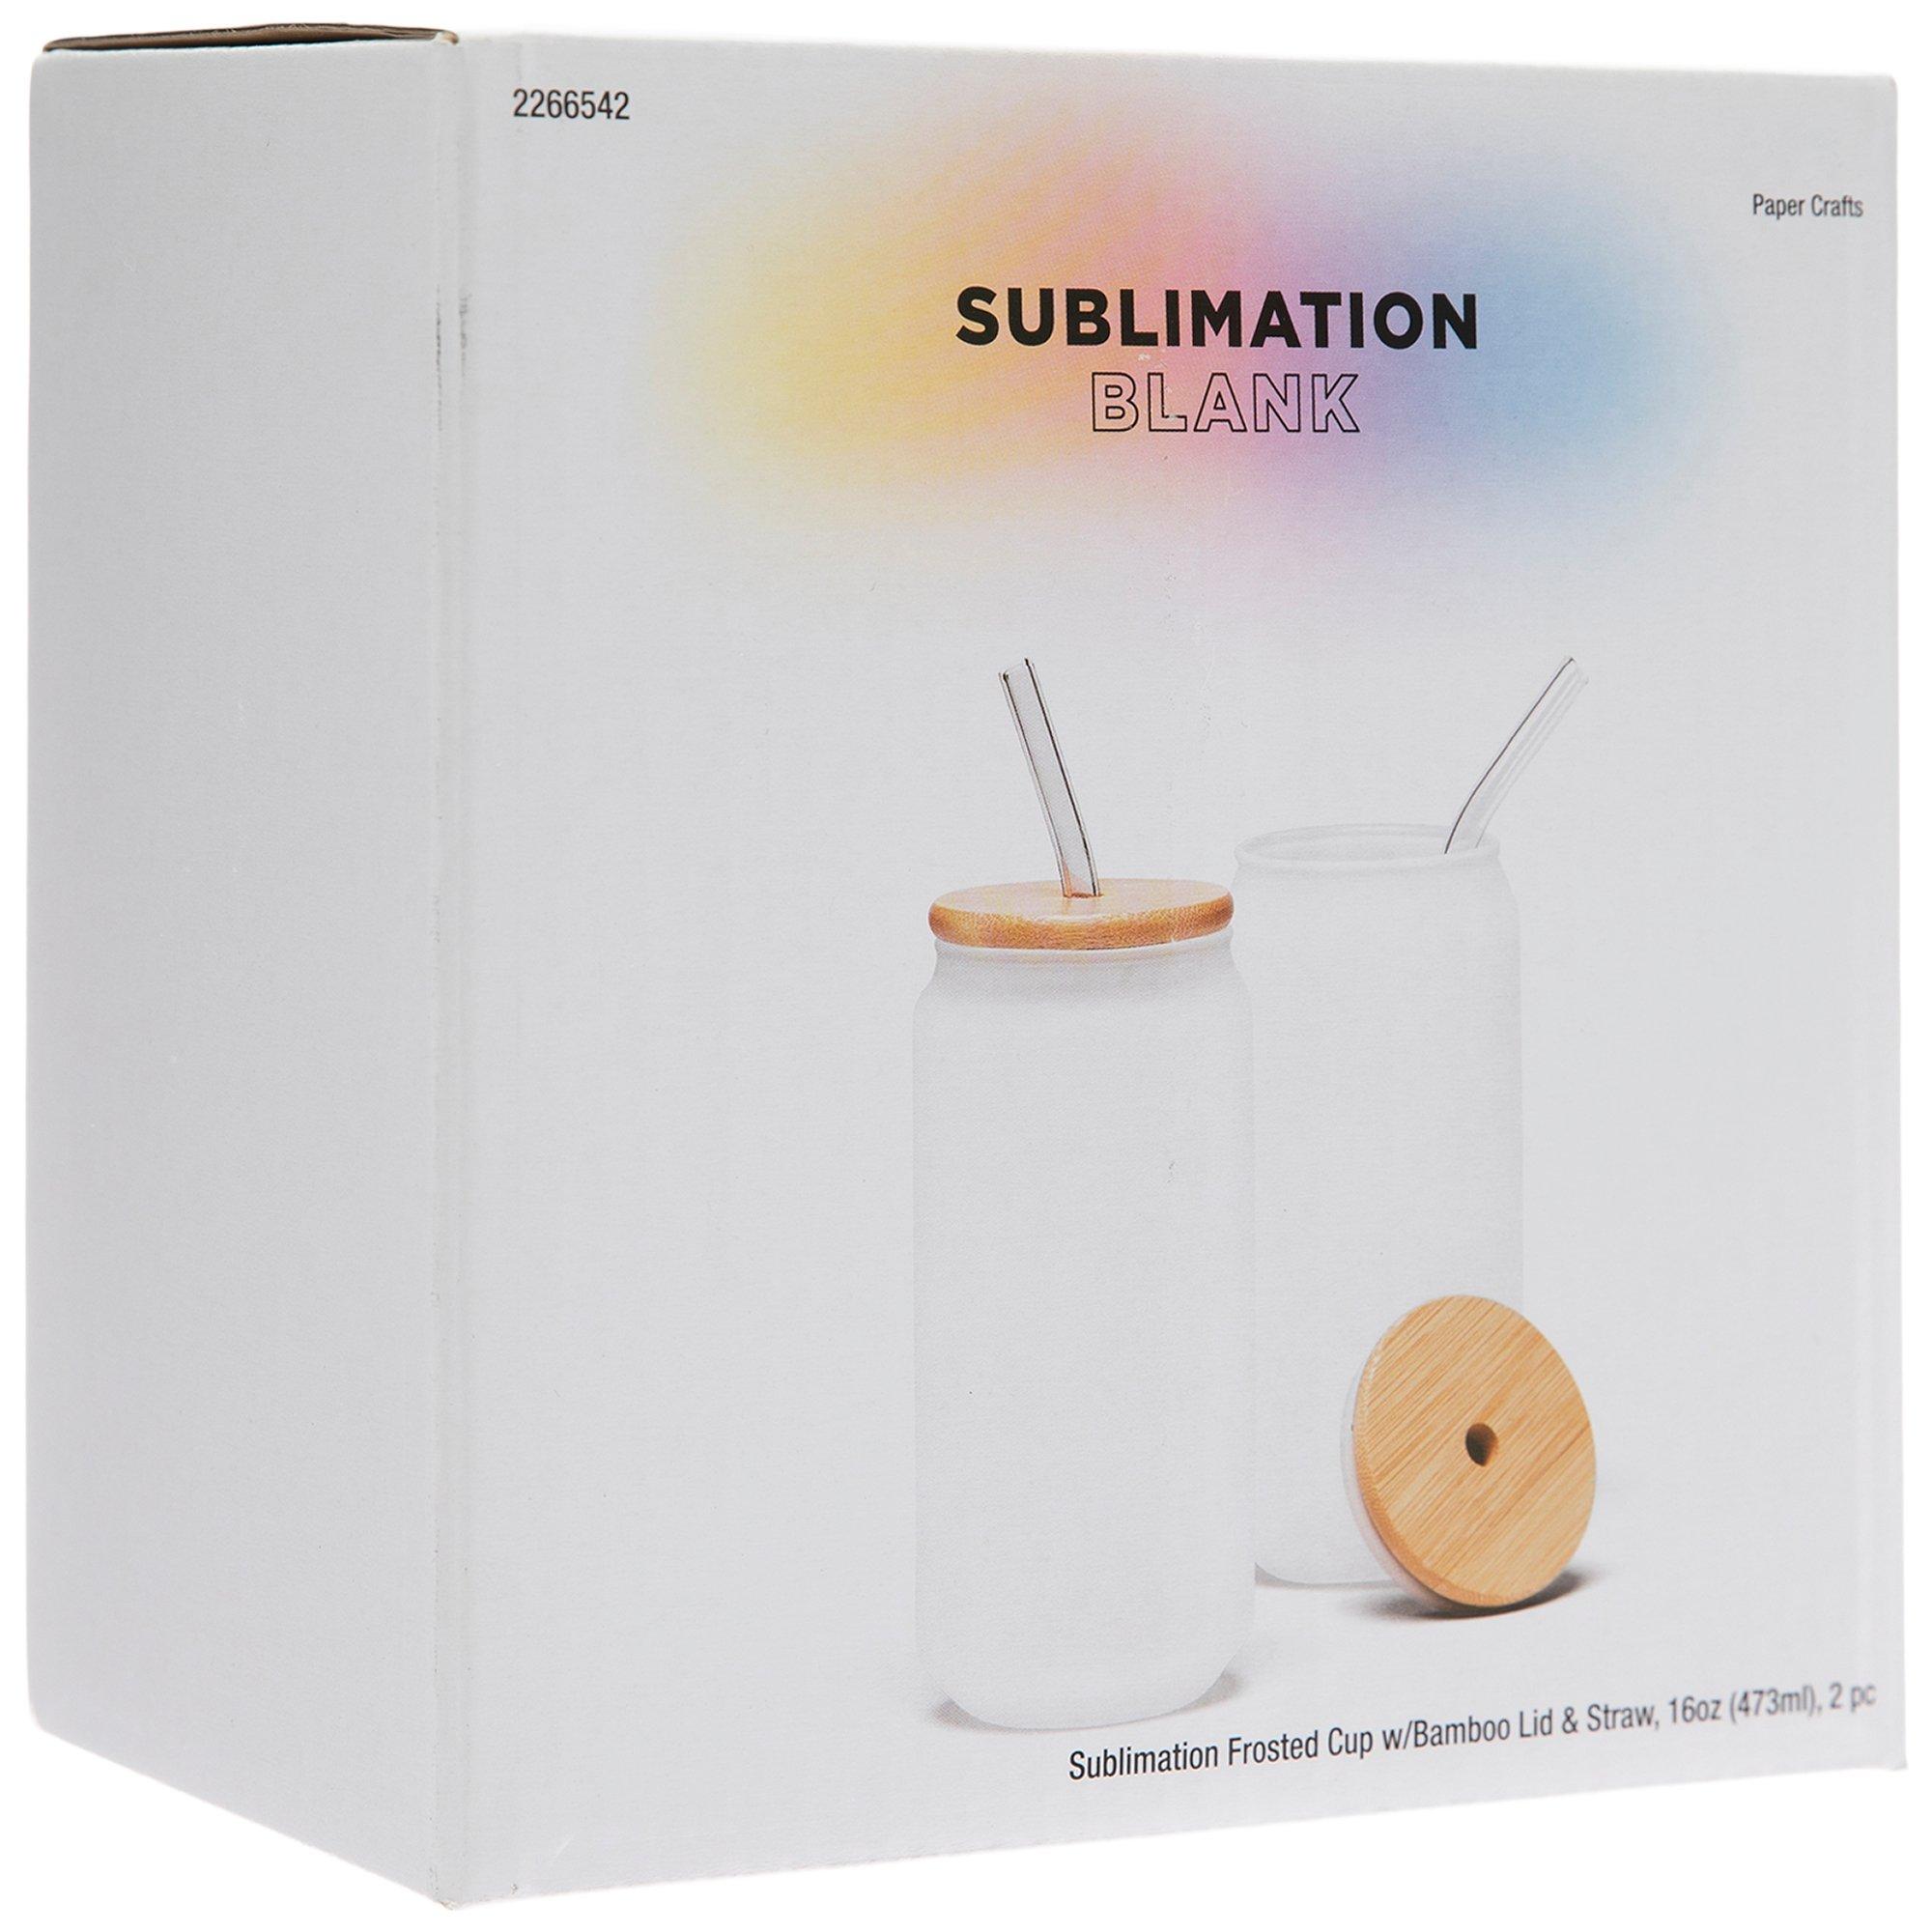 Sublimation Blank Crystal Jewelry Sampler Pack